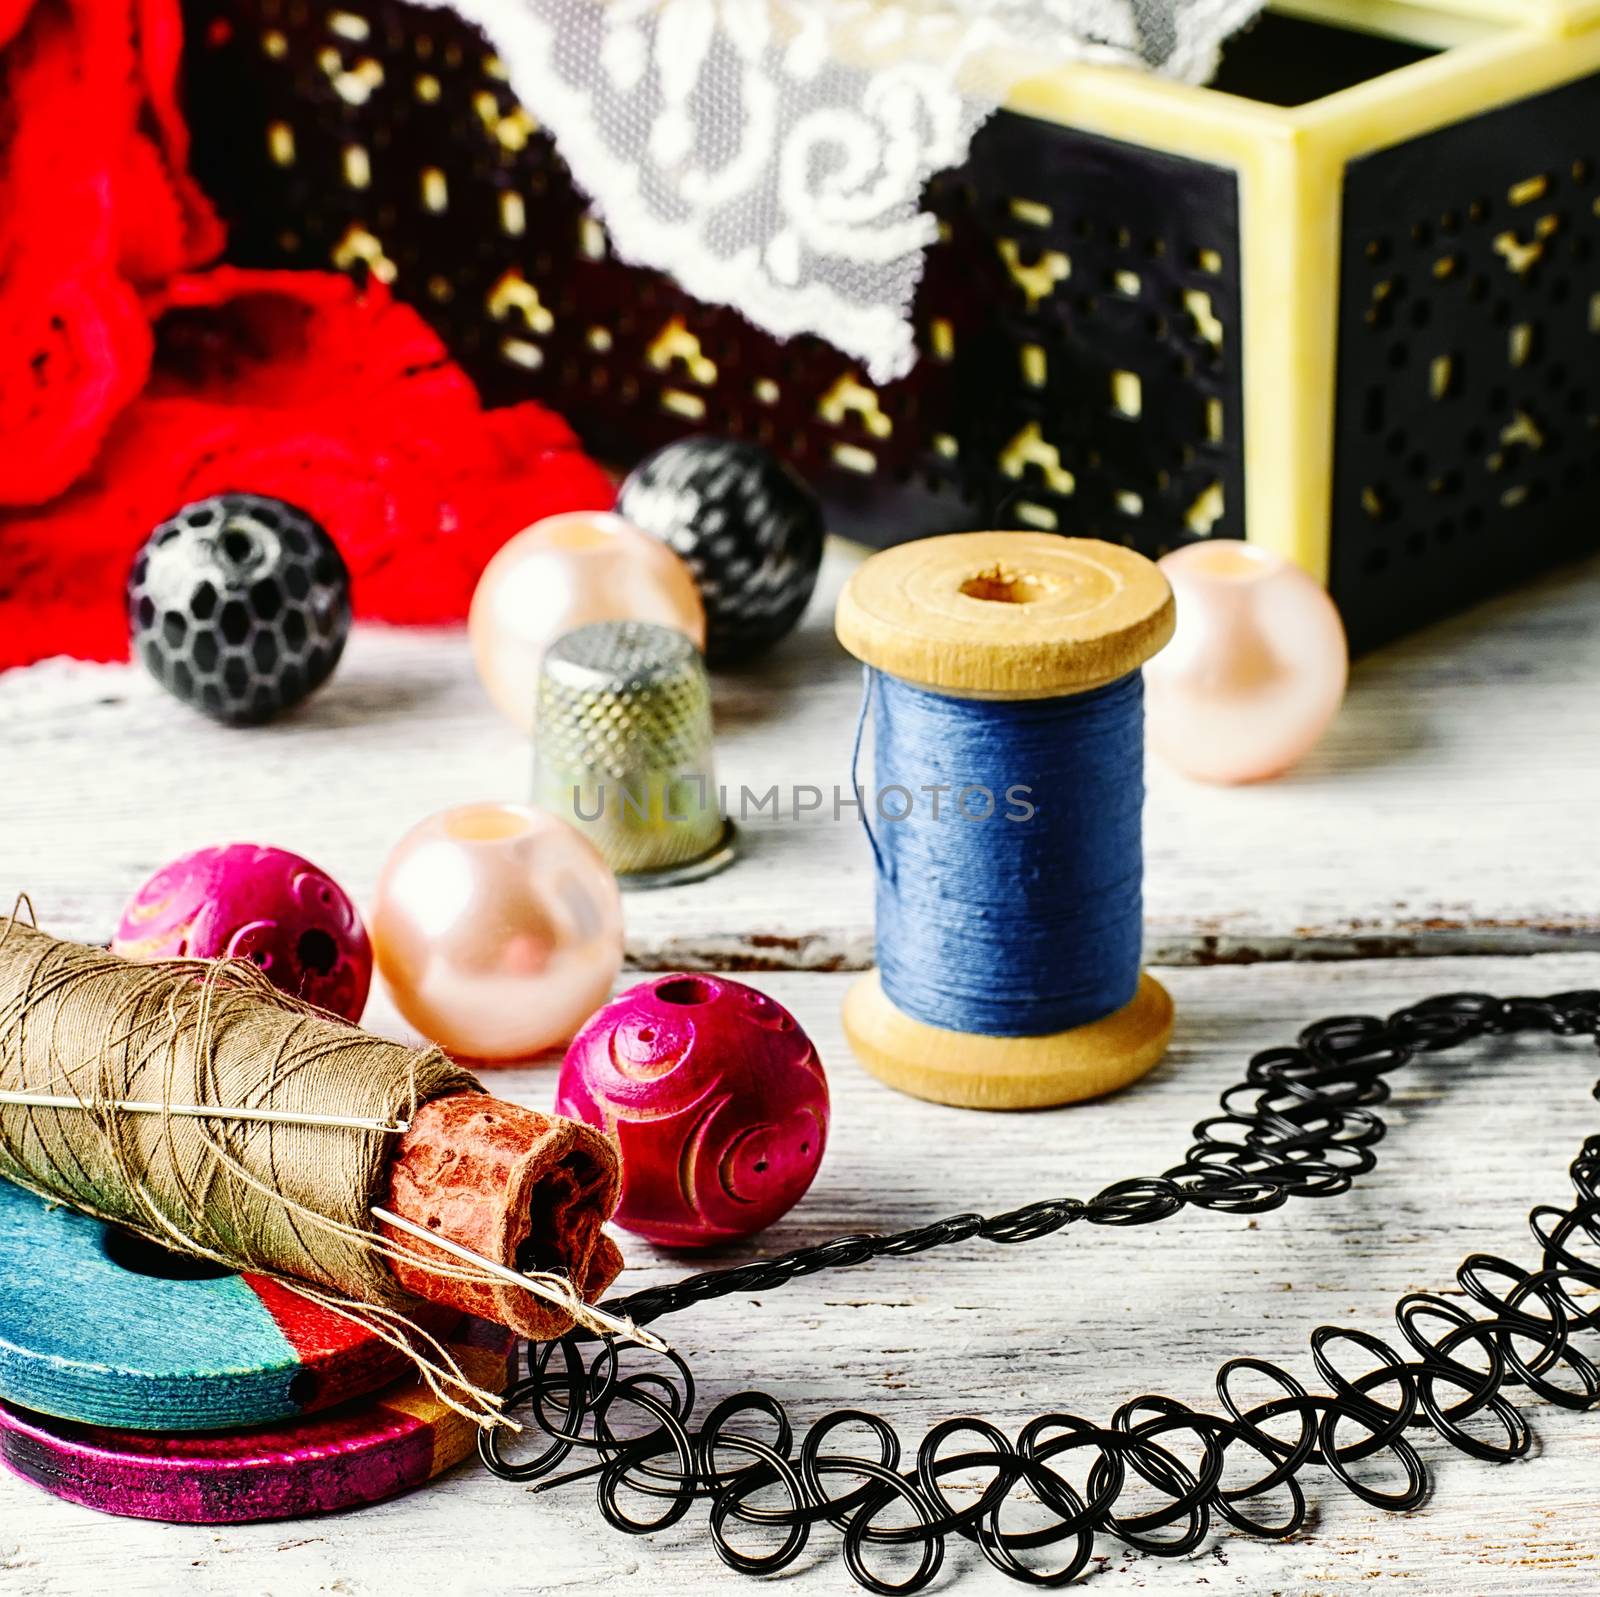 Jewelry and a sewing tool by LMykola